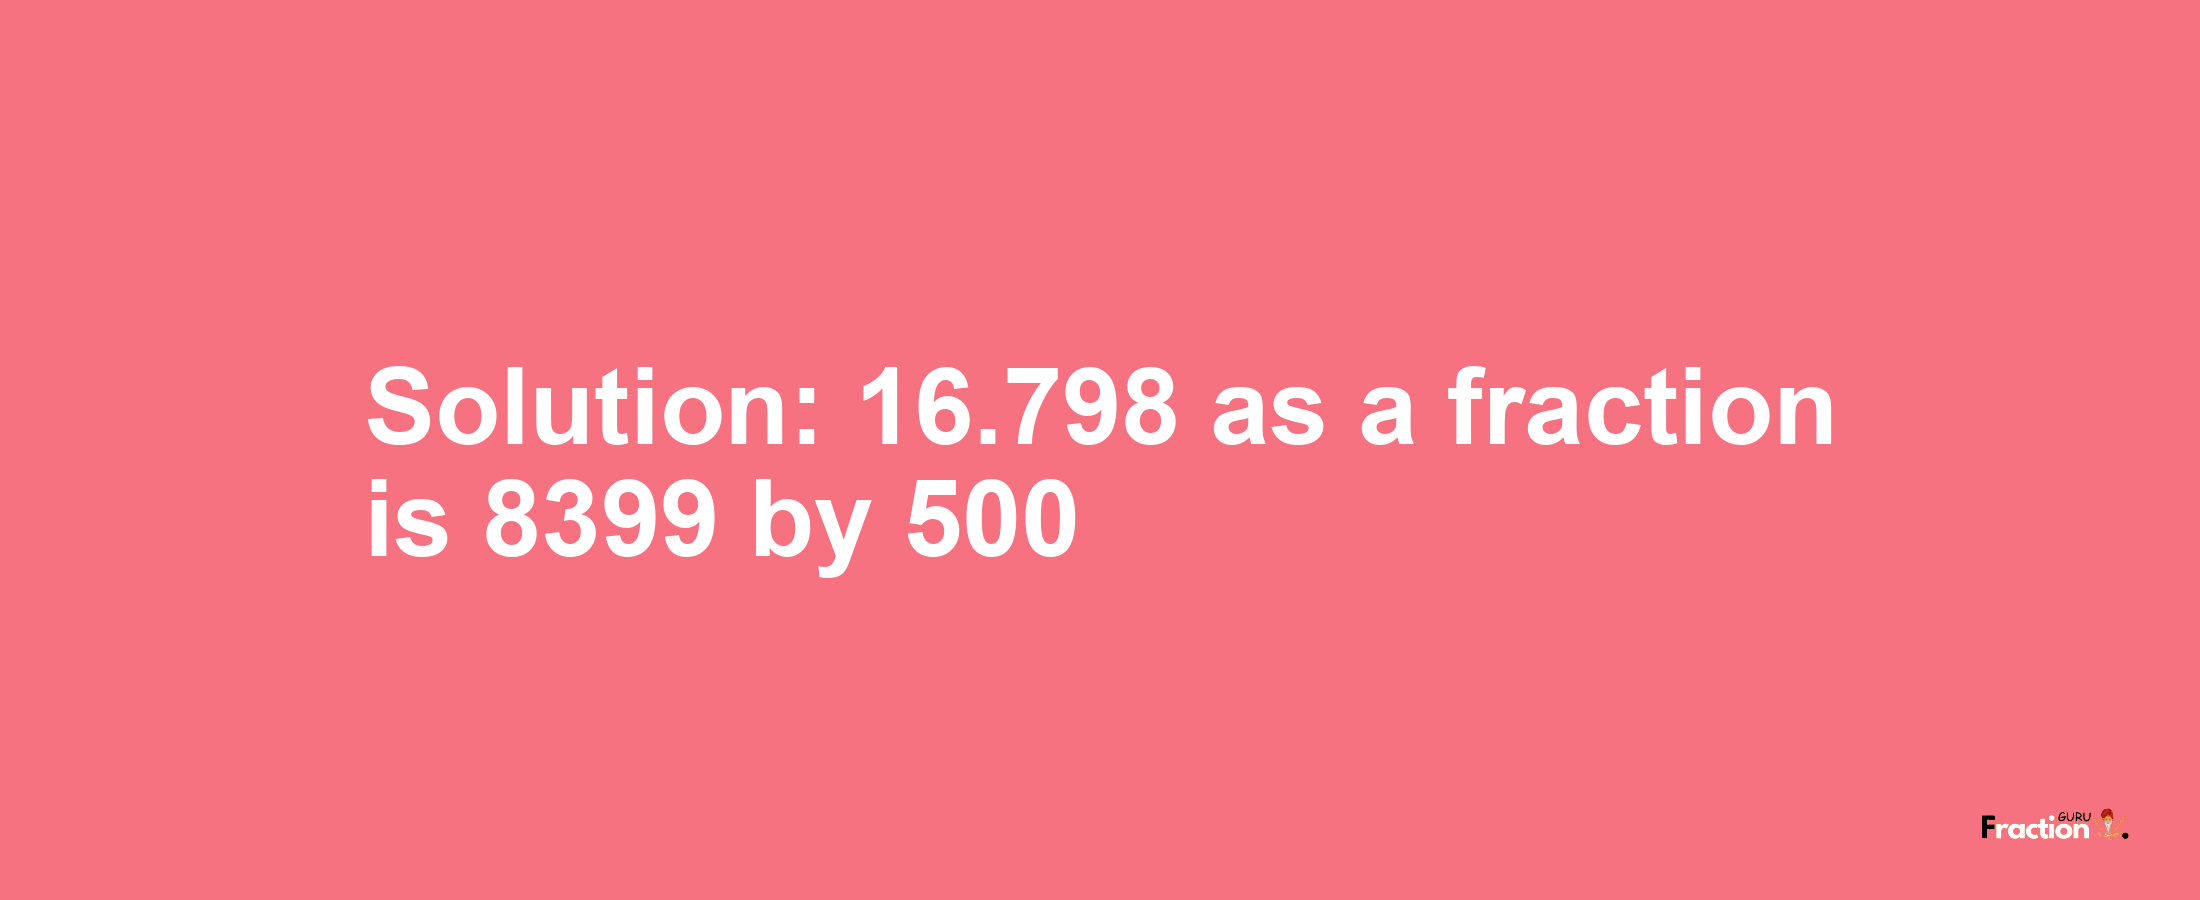 Solution:16.798 as a fraction is 8399/500